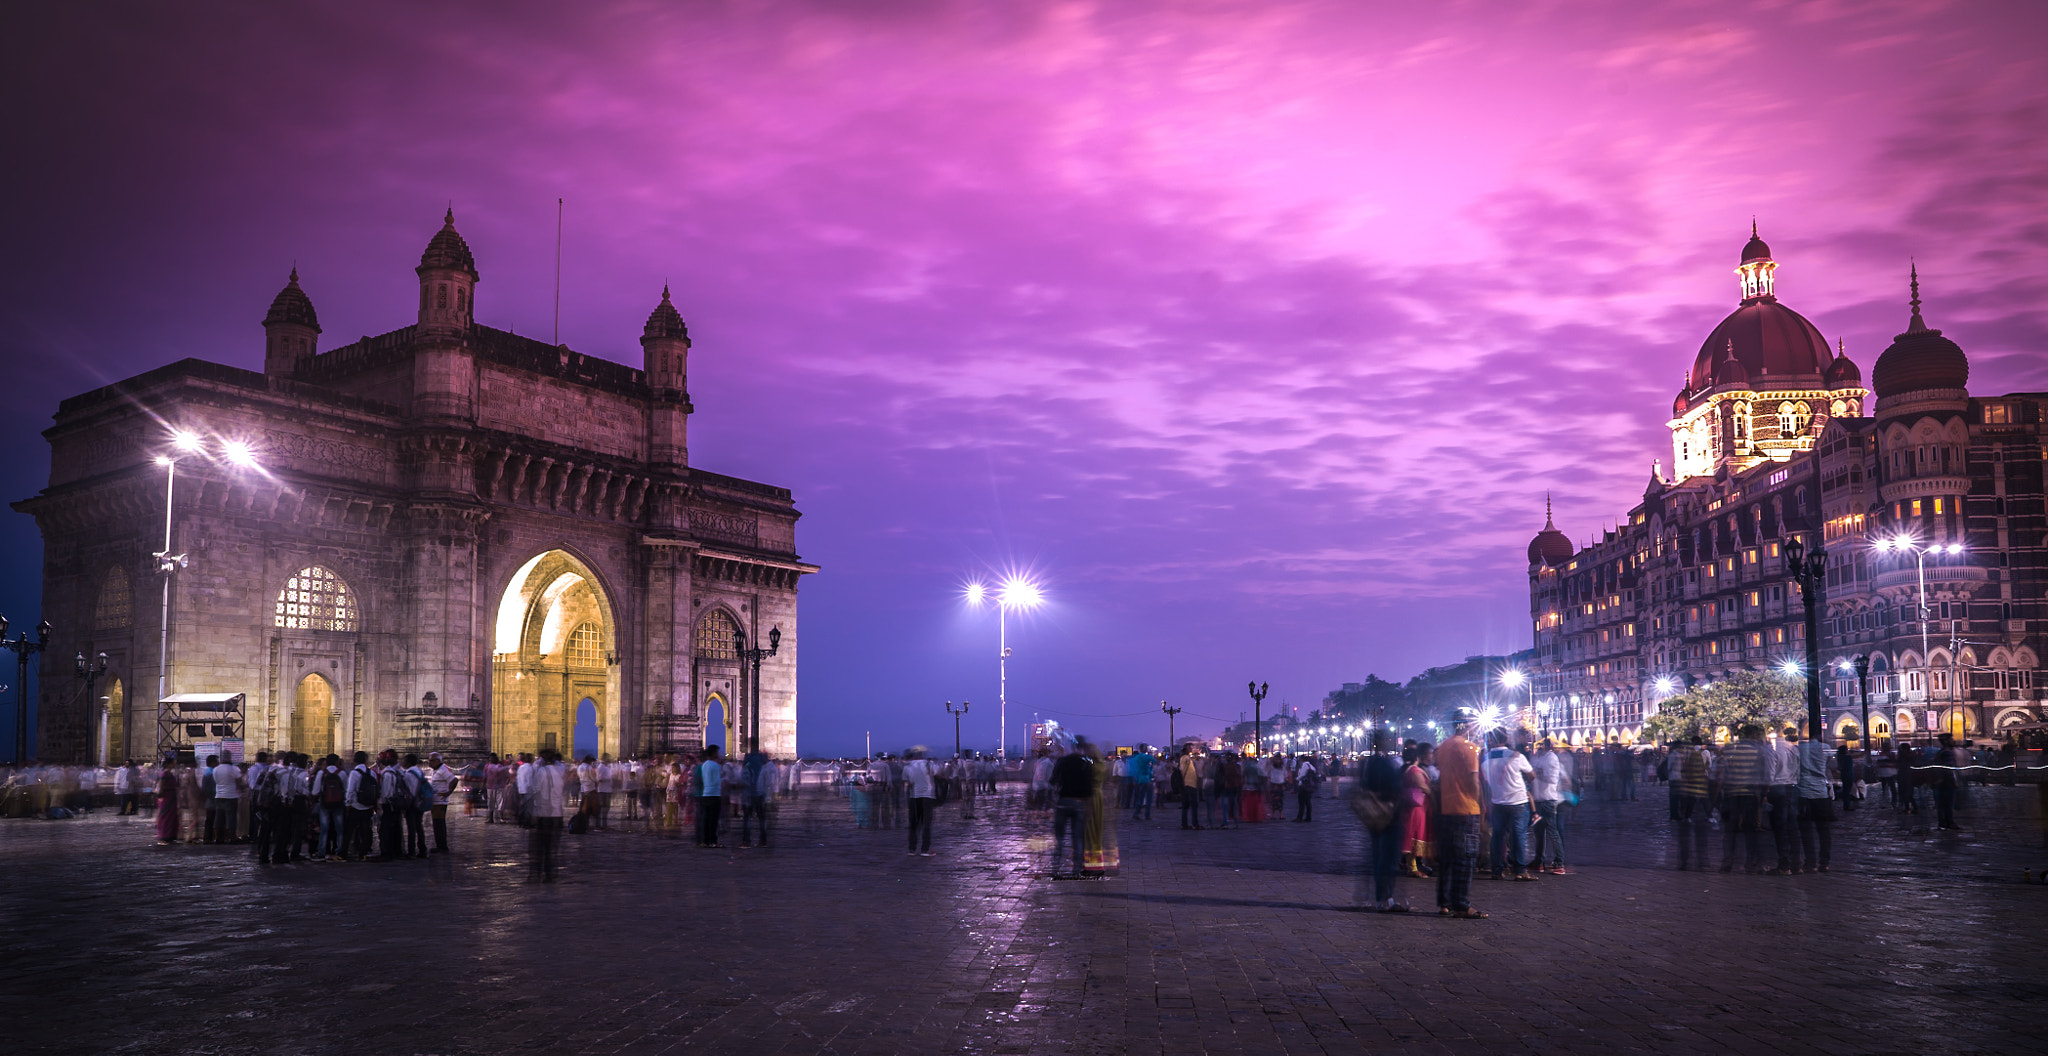 Sony a7S sample photo. The gateway of india is a monument built during th ... photography